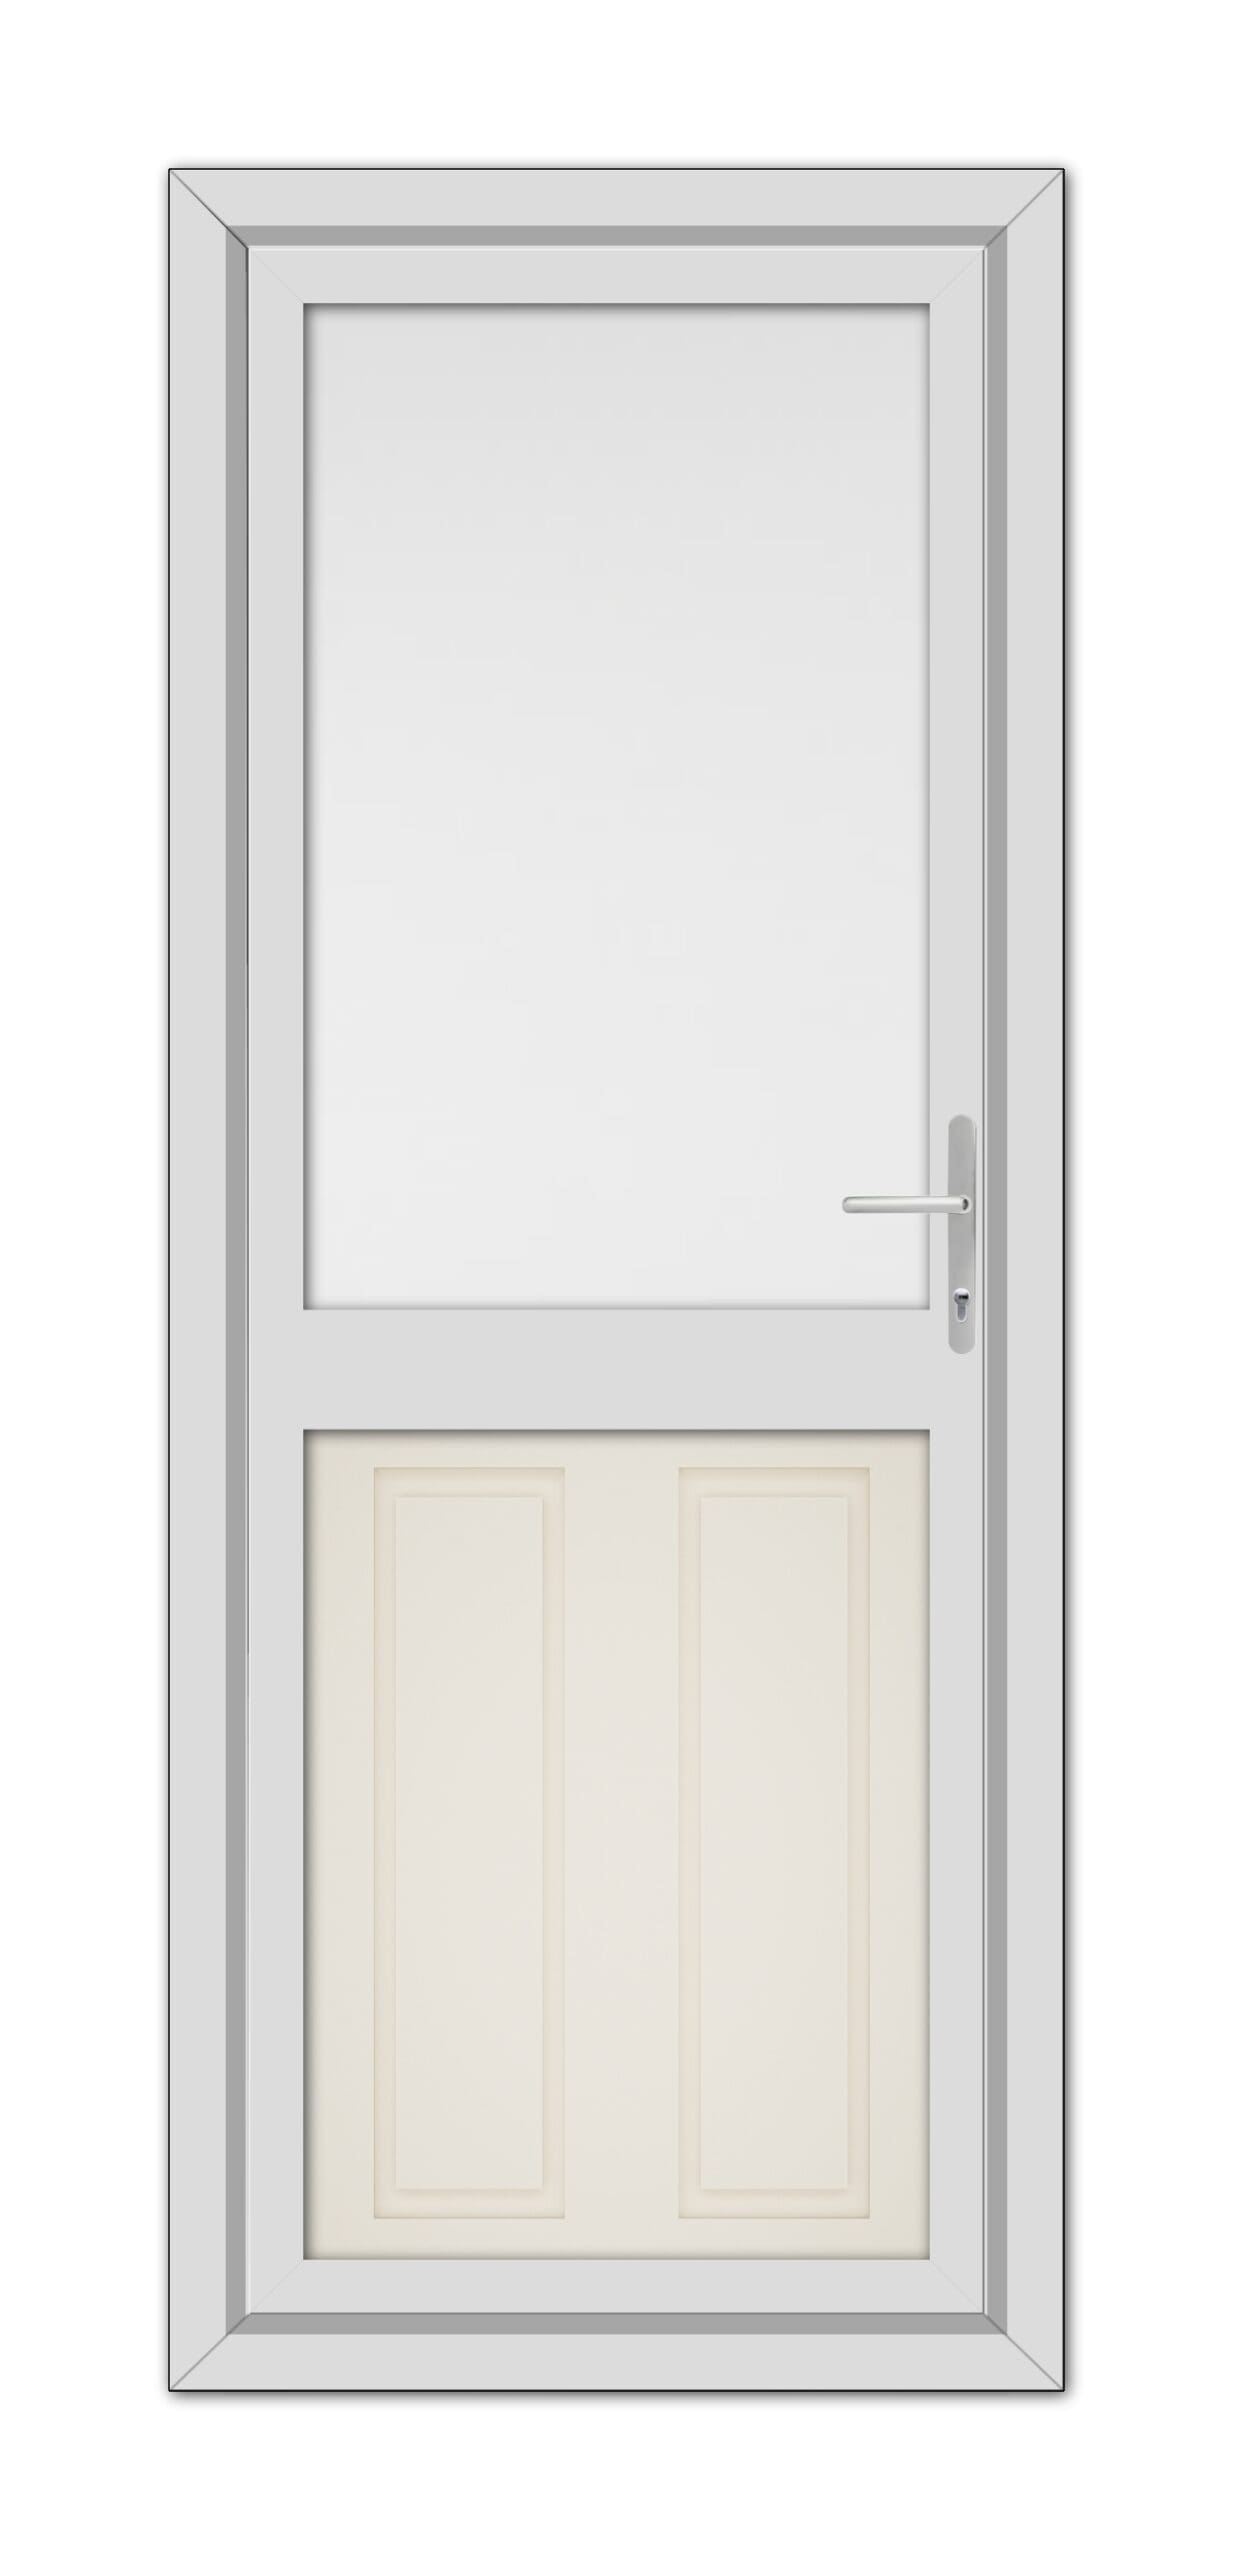 A Cream Manor Half uPVC Back Door with a small square window at the top, featuring a silver handle on the right, set within a gray frame.